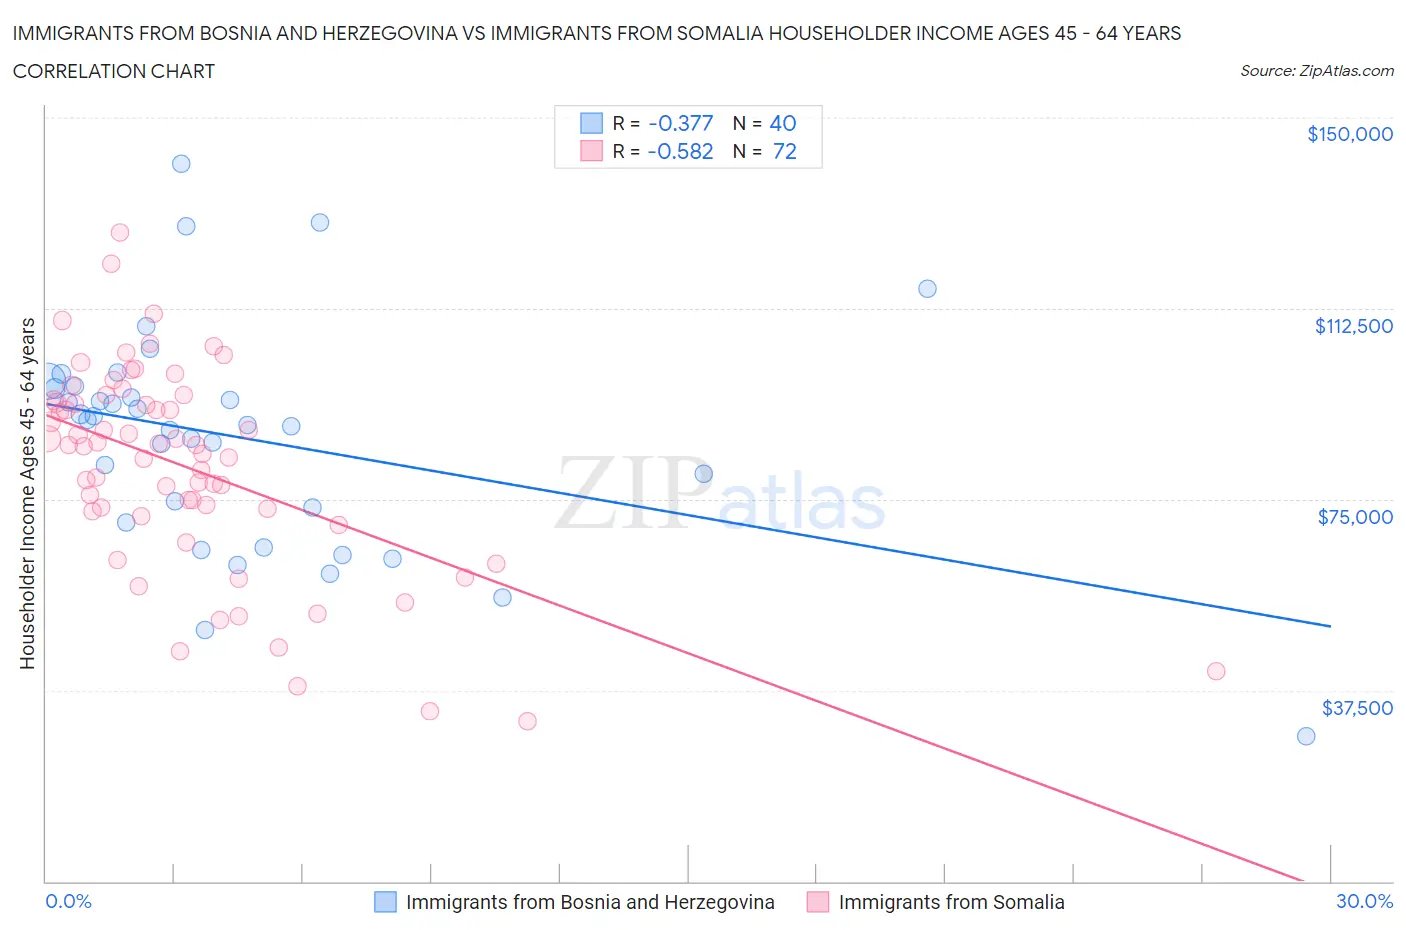 Immigrants from Bosnia and Herzegovina vs Immigrants from Somalia Householder Income Ages 45 - 64 years